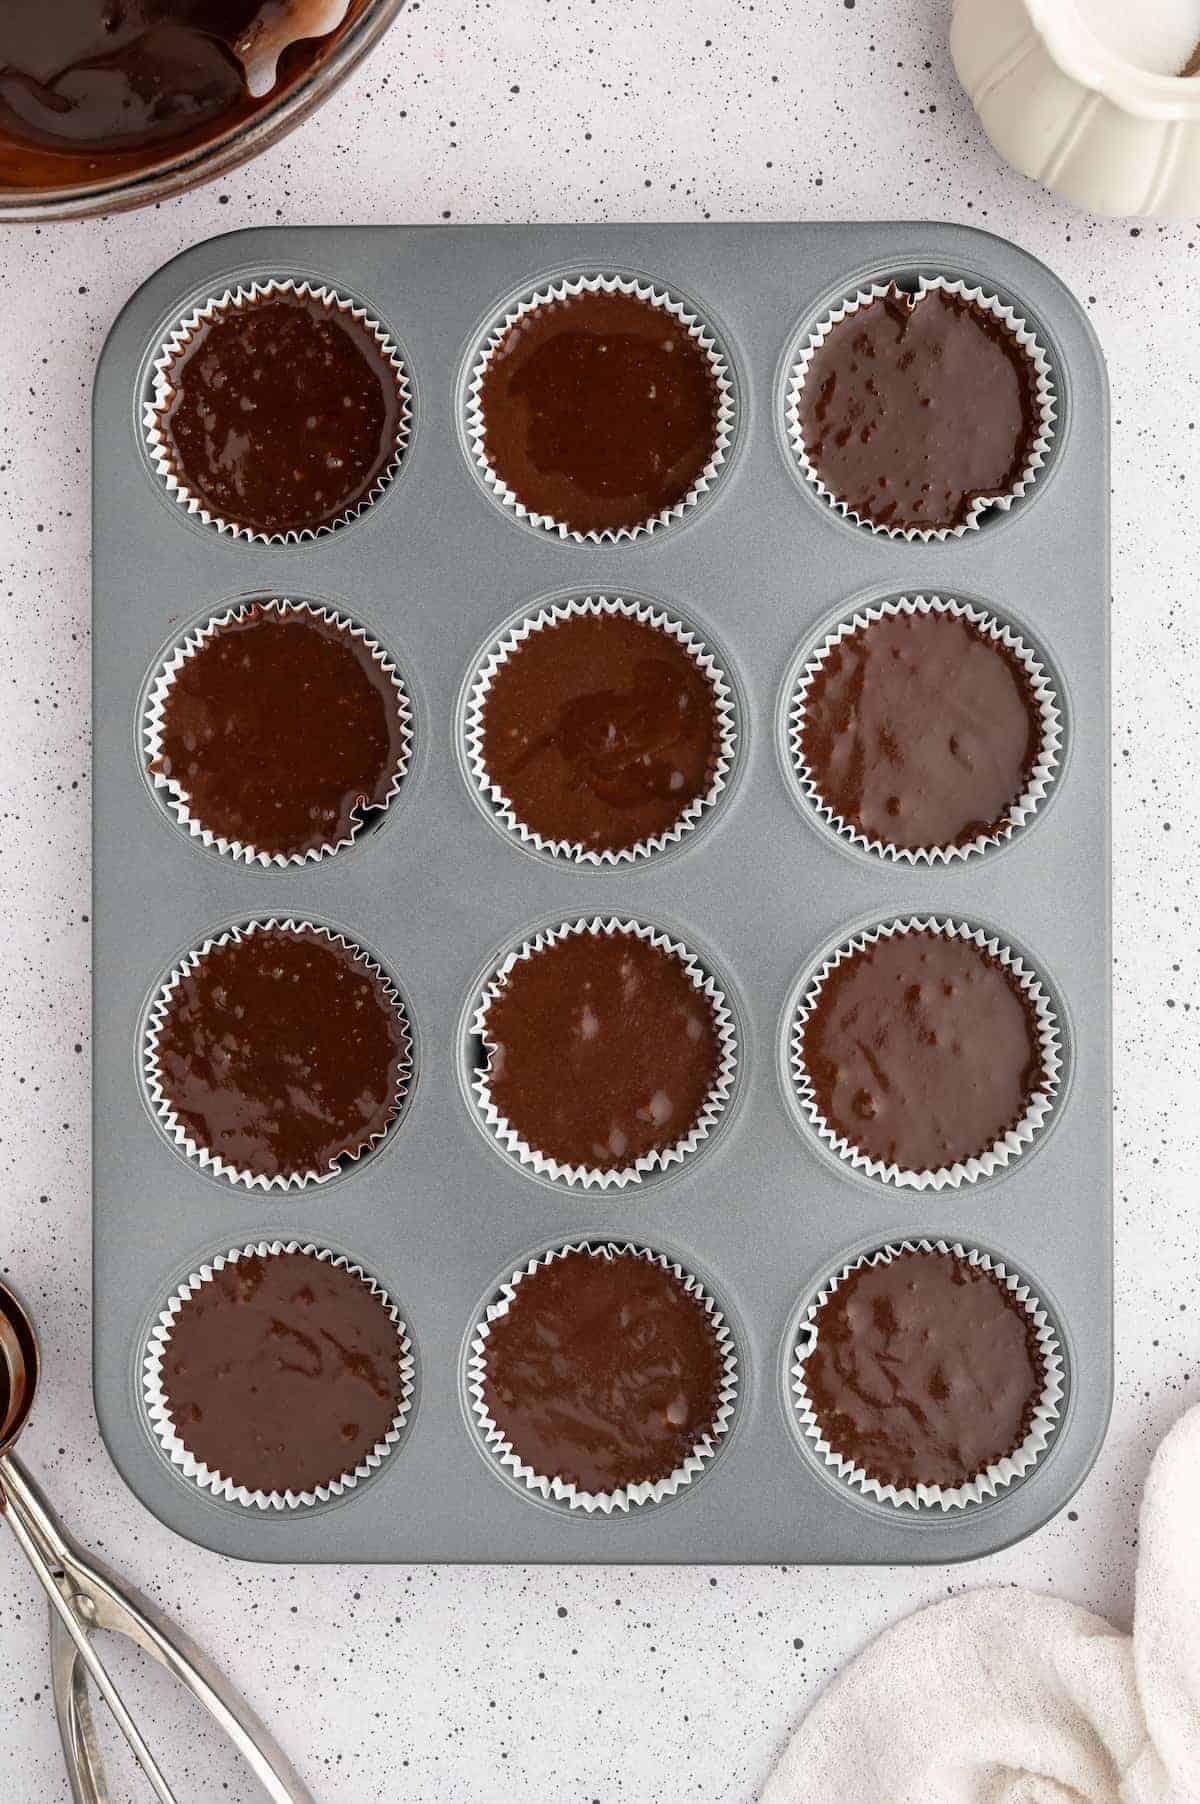 Vegan chocolate cupcake batter divided evenly into liners in a cupcake pan.